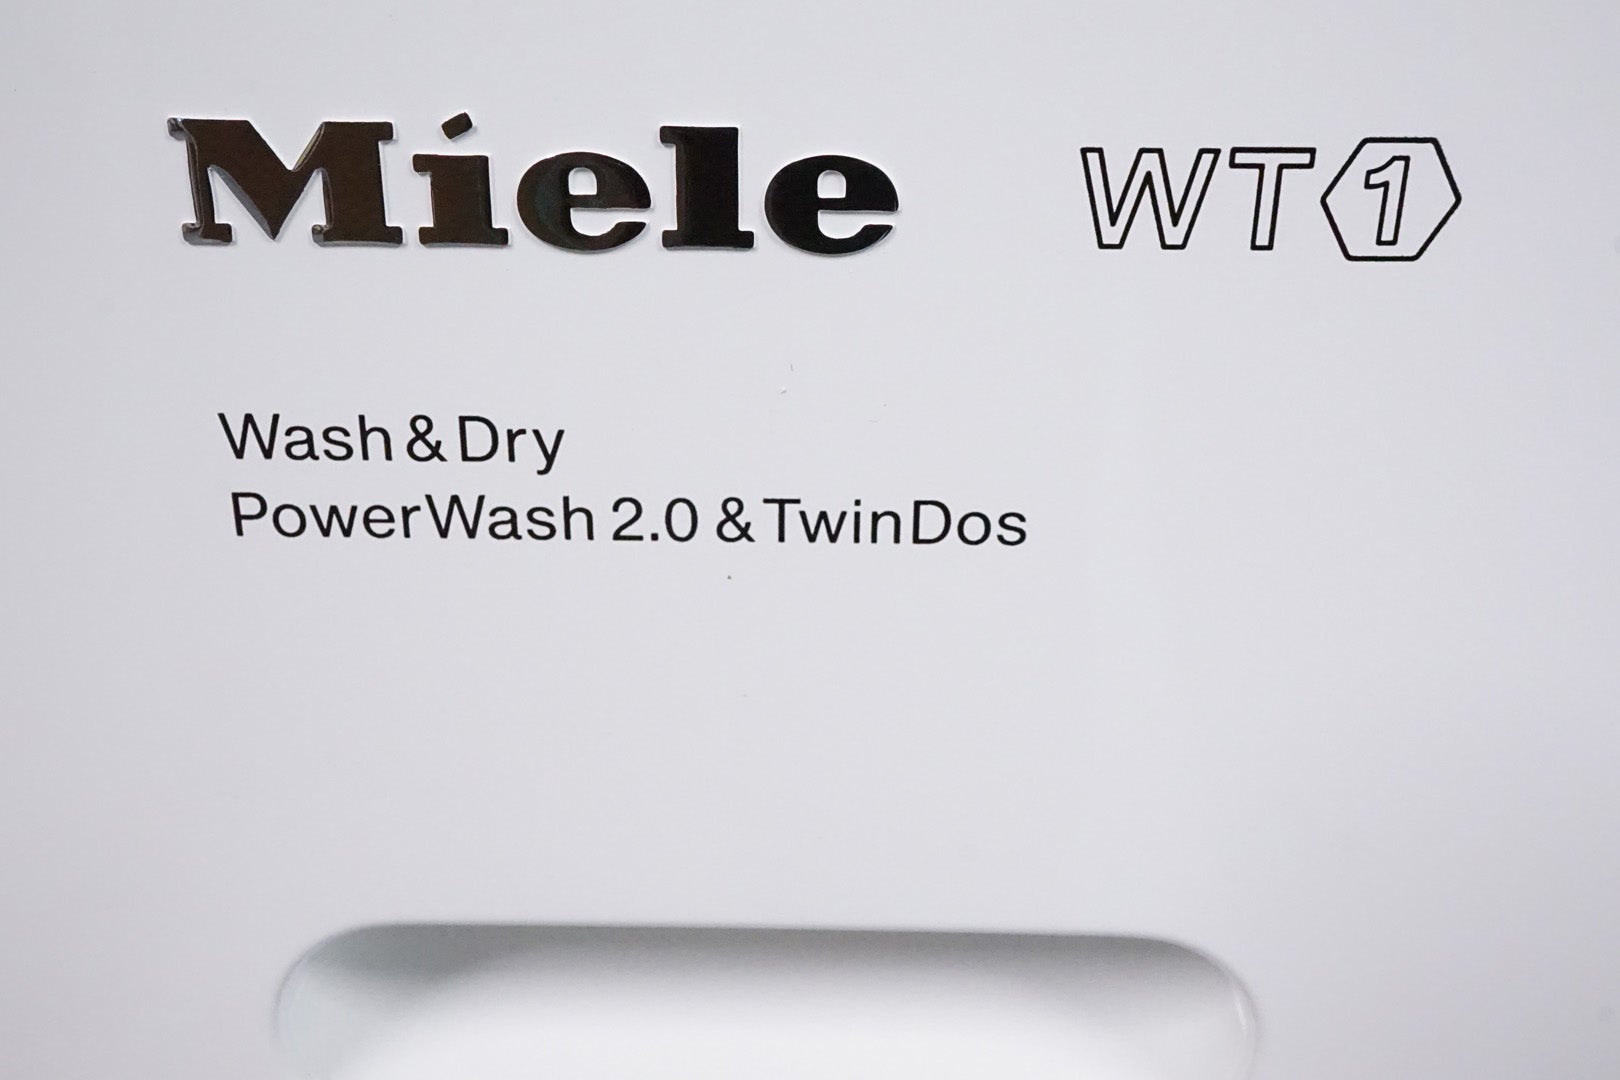 Miele WTH120 washer-dryer logo with PowerWash and TwinDos features.